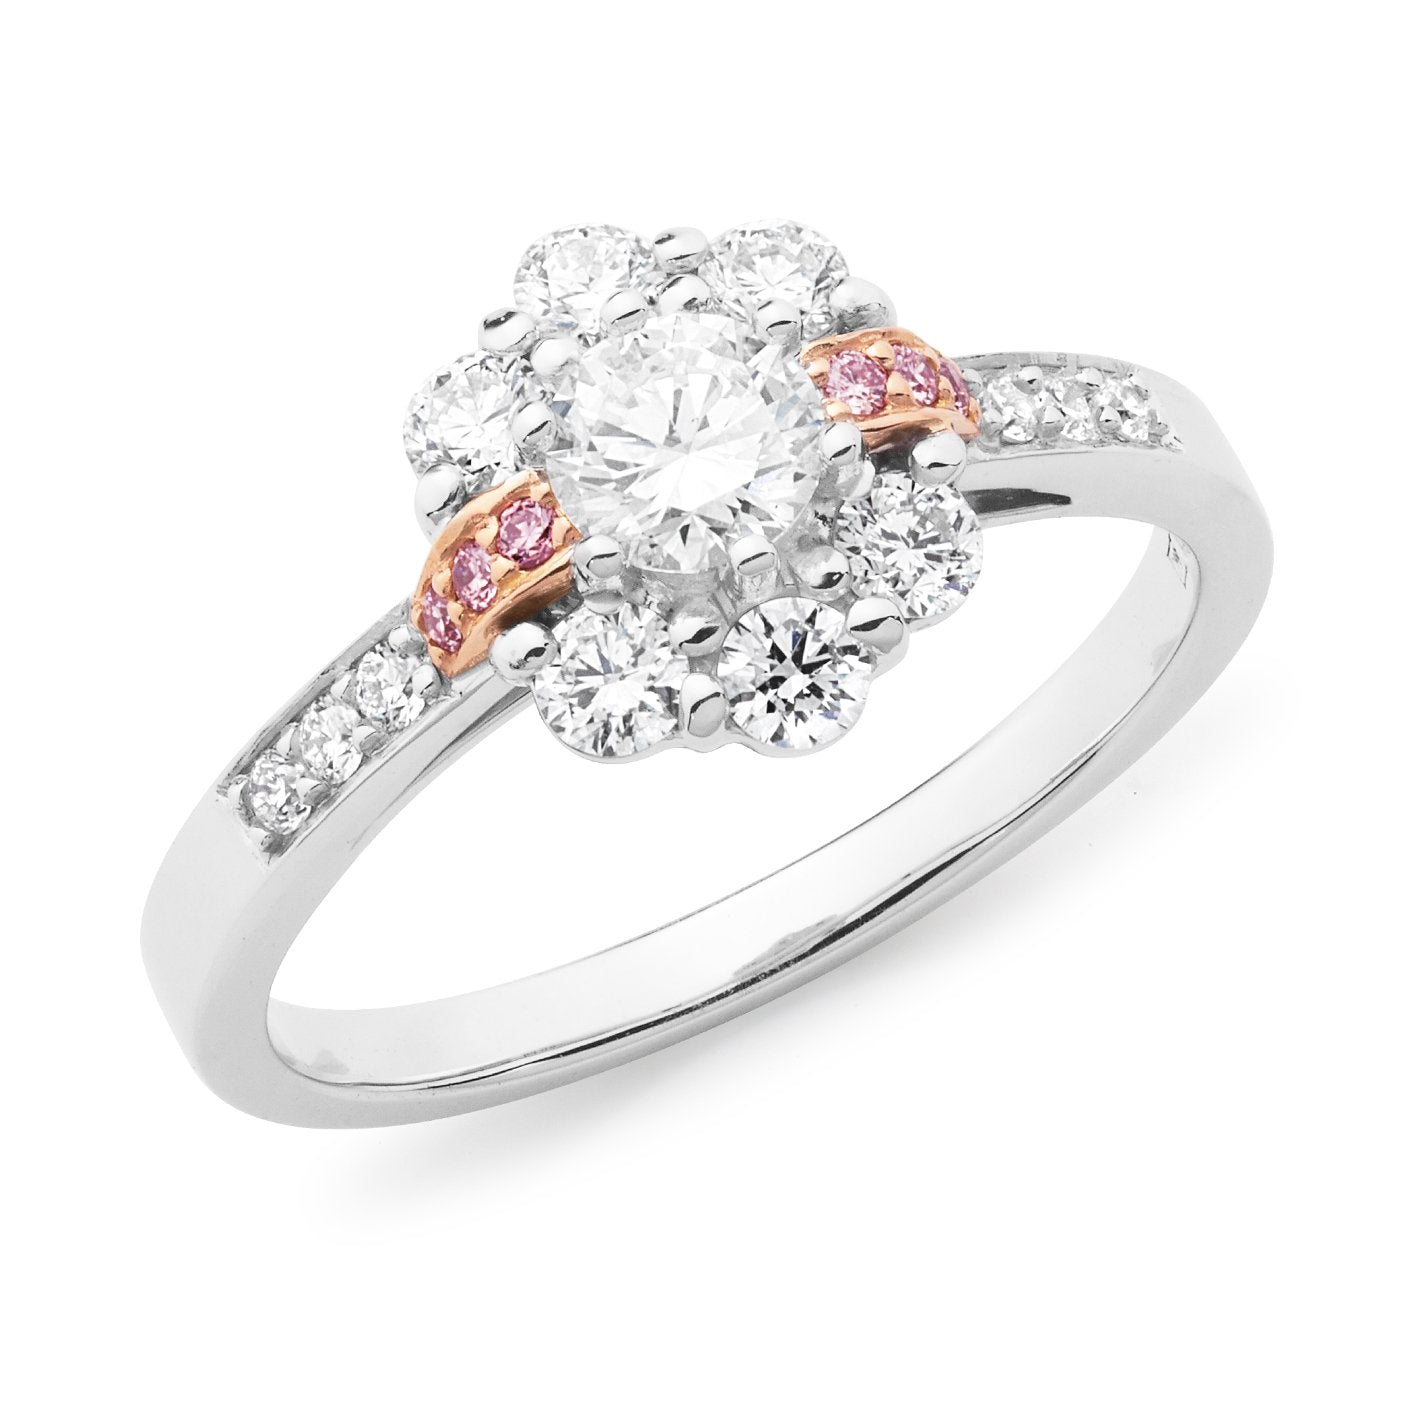 PINK CAVIAR 0.75ct White Round Brilliant & Pink Diamond Engagement Ring in 18ct White Gold